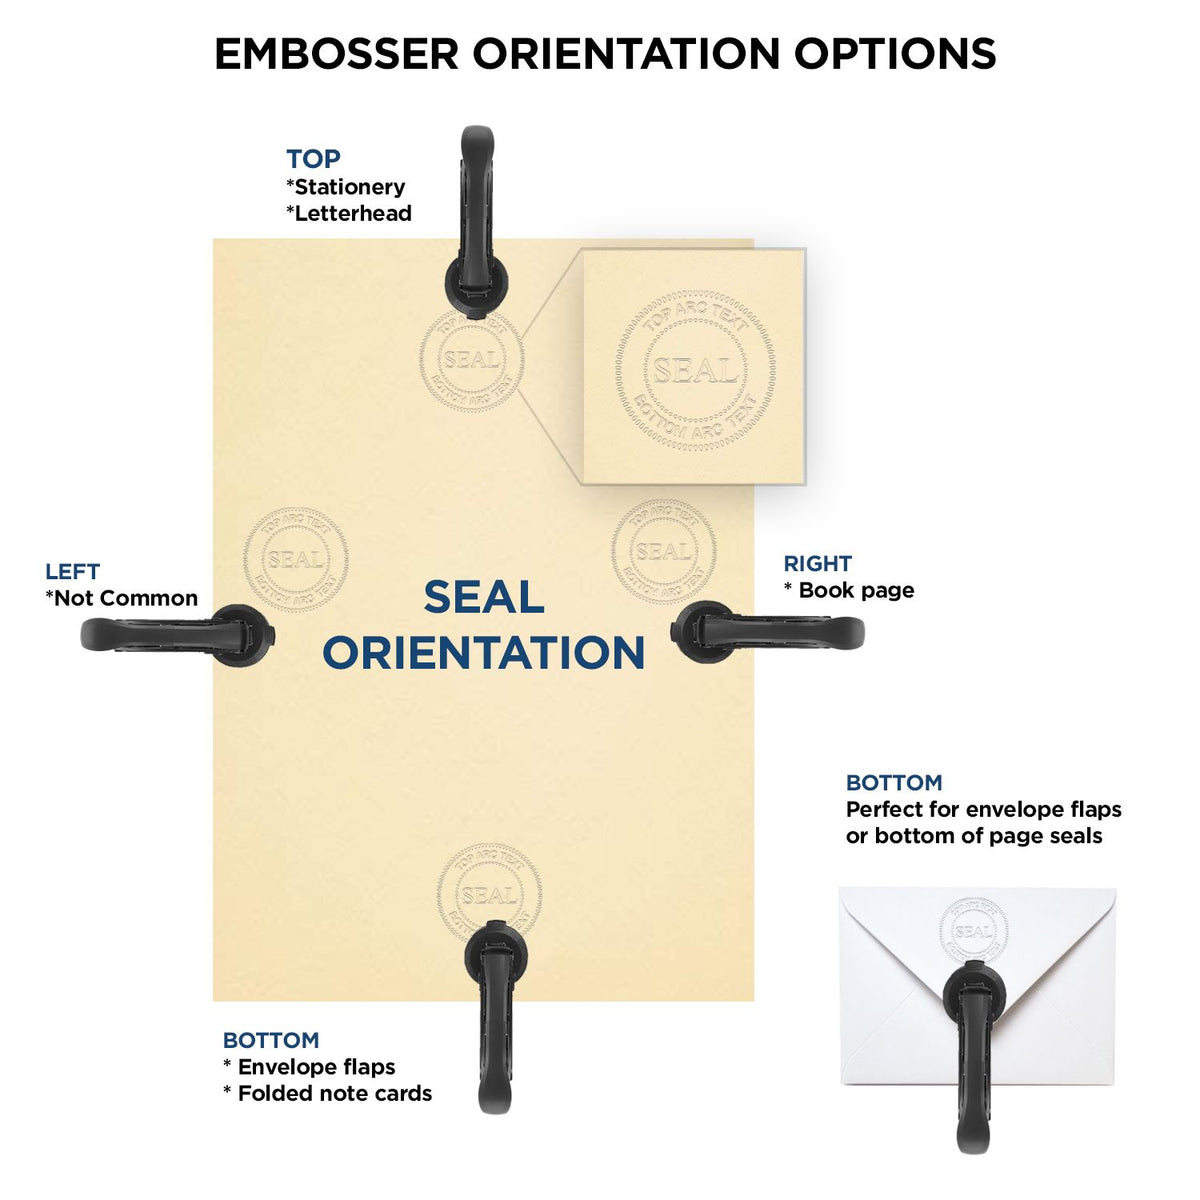 An infographic for the Handheld Alabama Architect Seal Embosser showing embosser orientation, this is showing examples of a top, bottom, right and left insert.